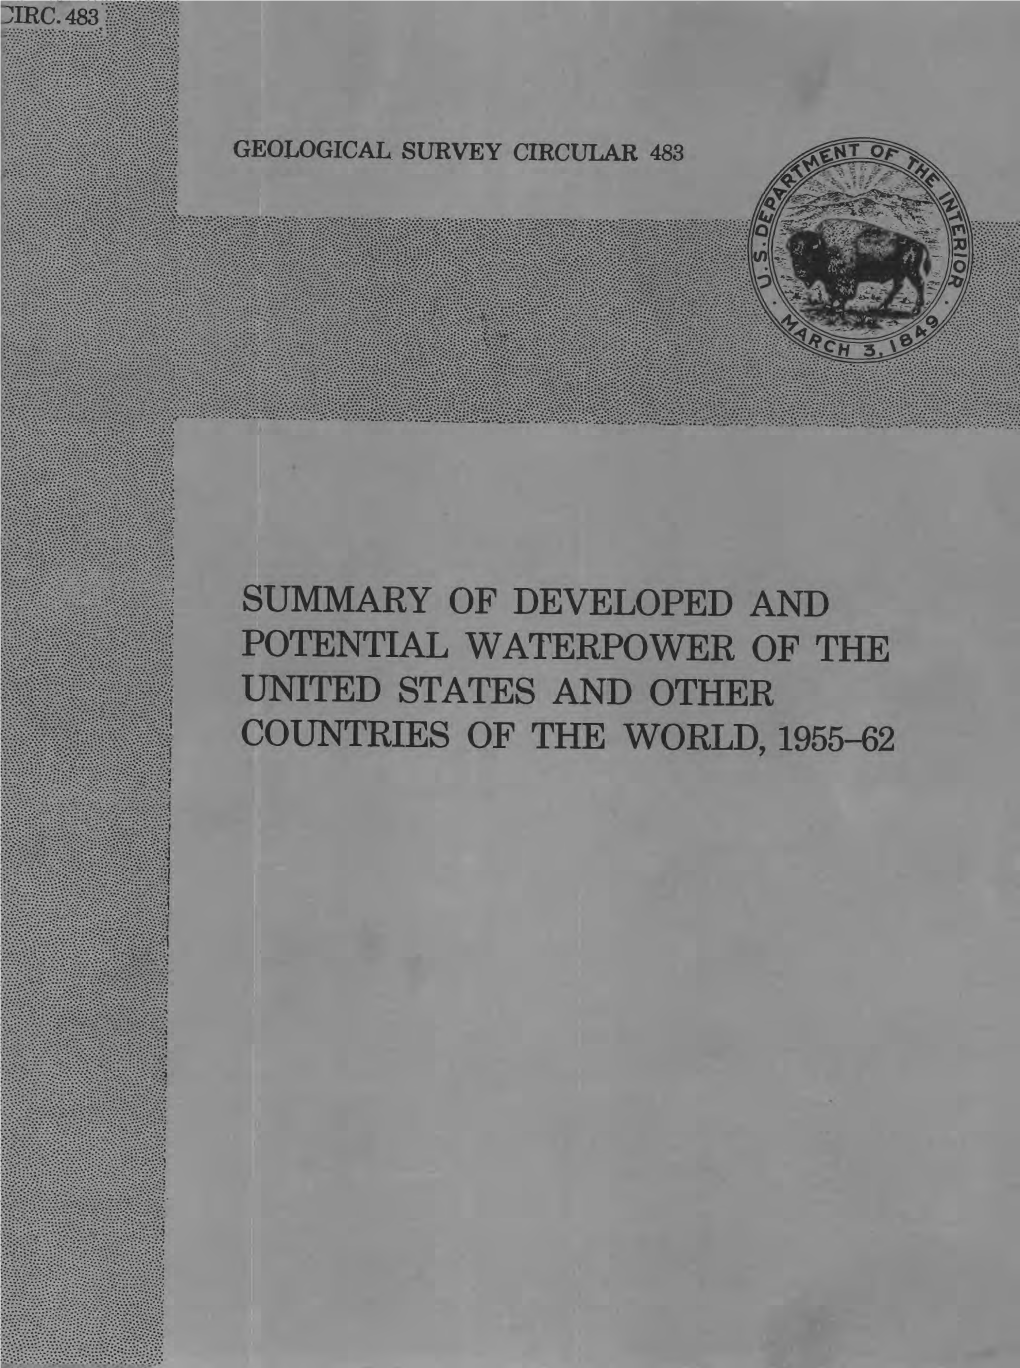 Summary of Developed and Potential Waterpower of the United States and Other Countries of the World, 1955-62 Geological Survey Circular 483